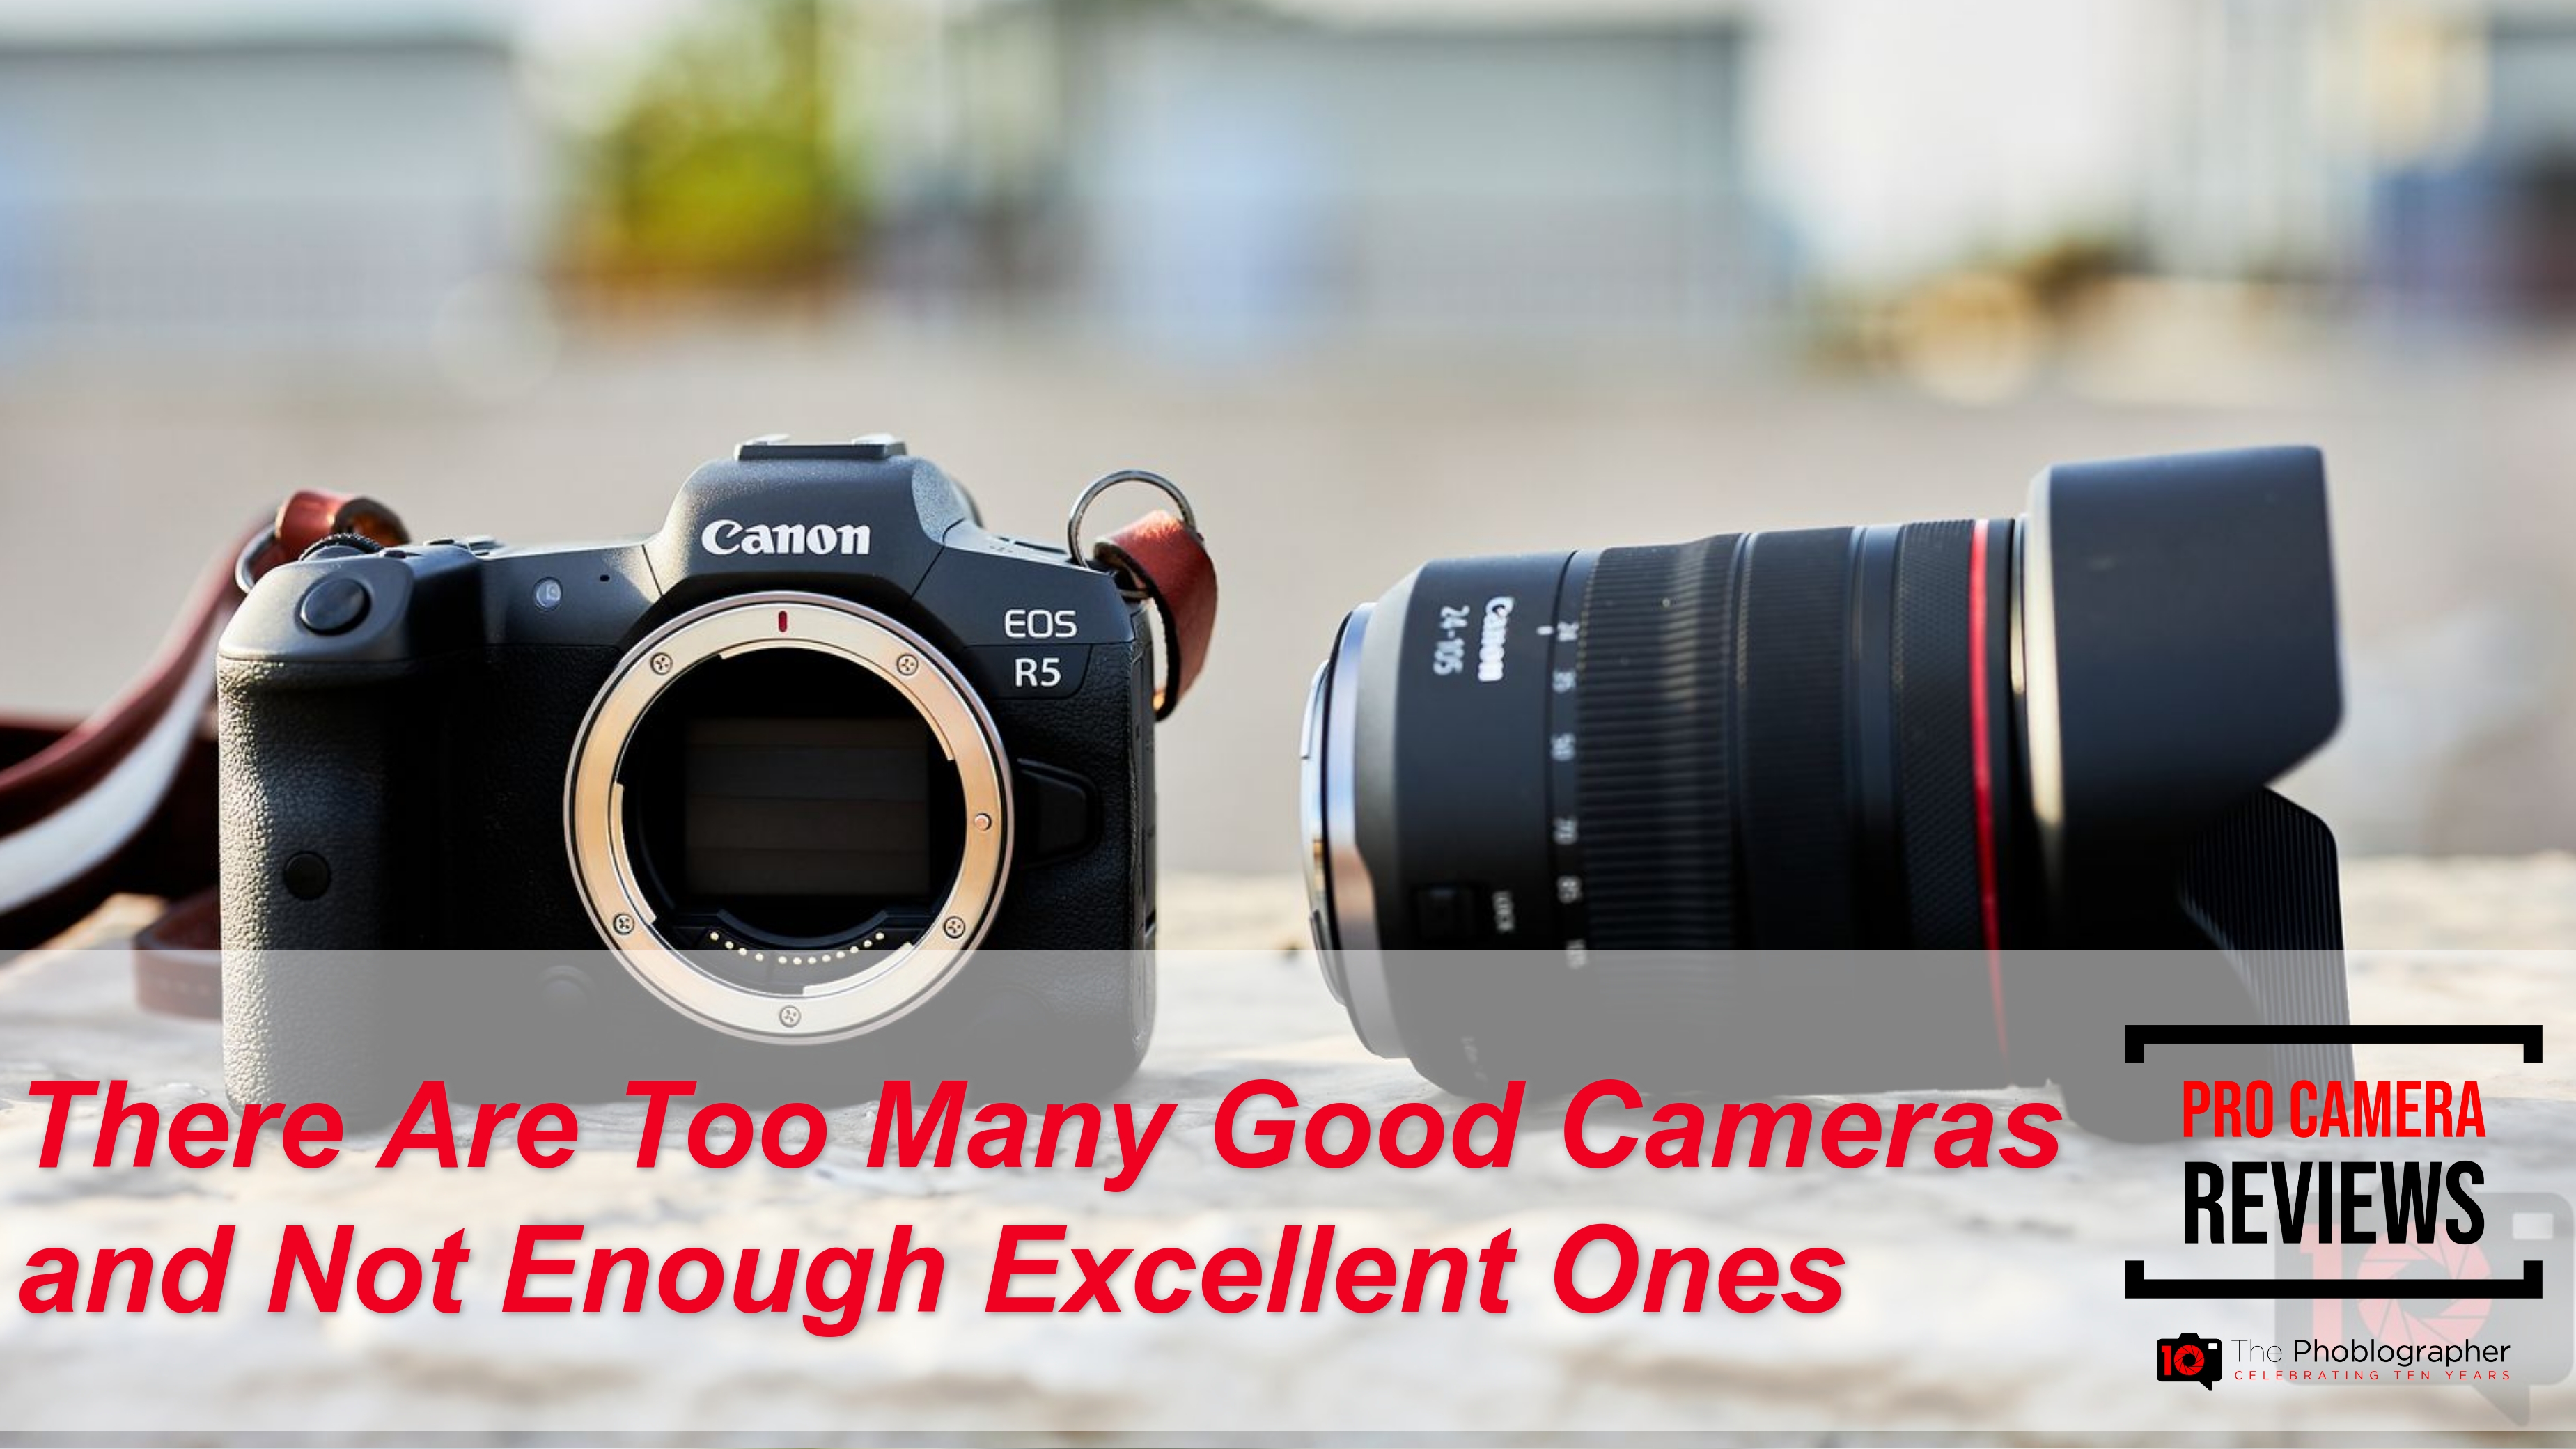 There Are Too Many Good Cameras and Not Enough Excellent Ones